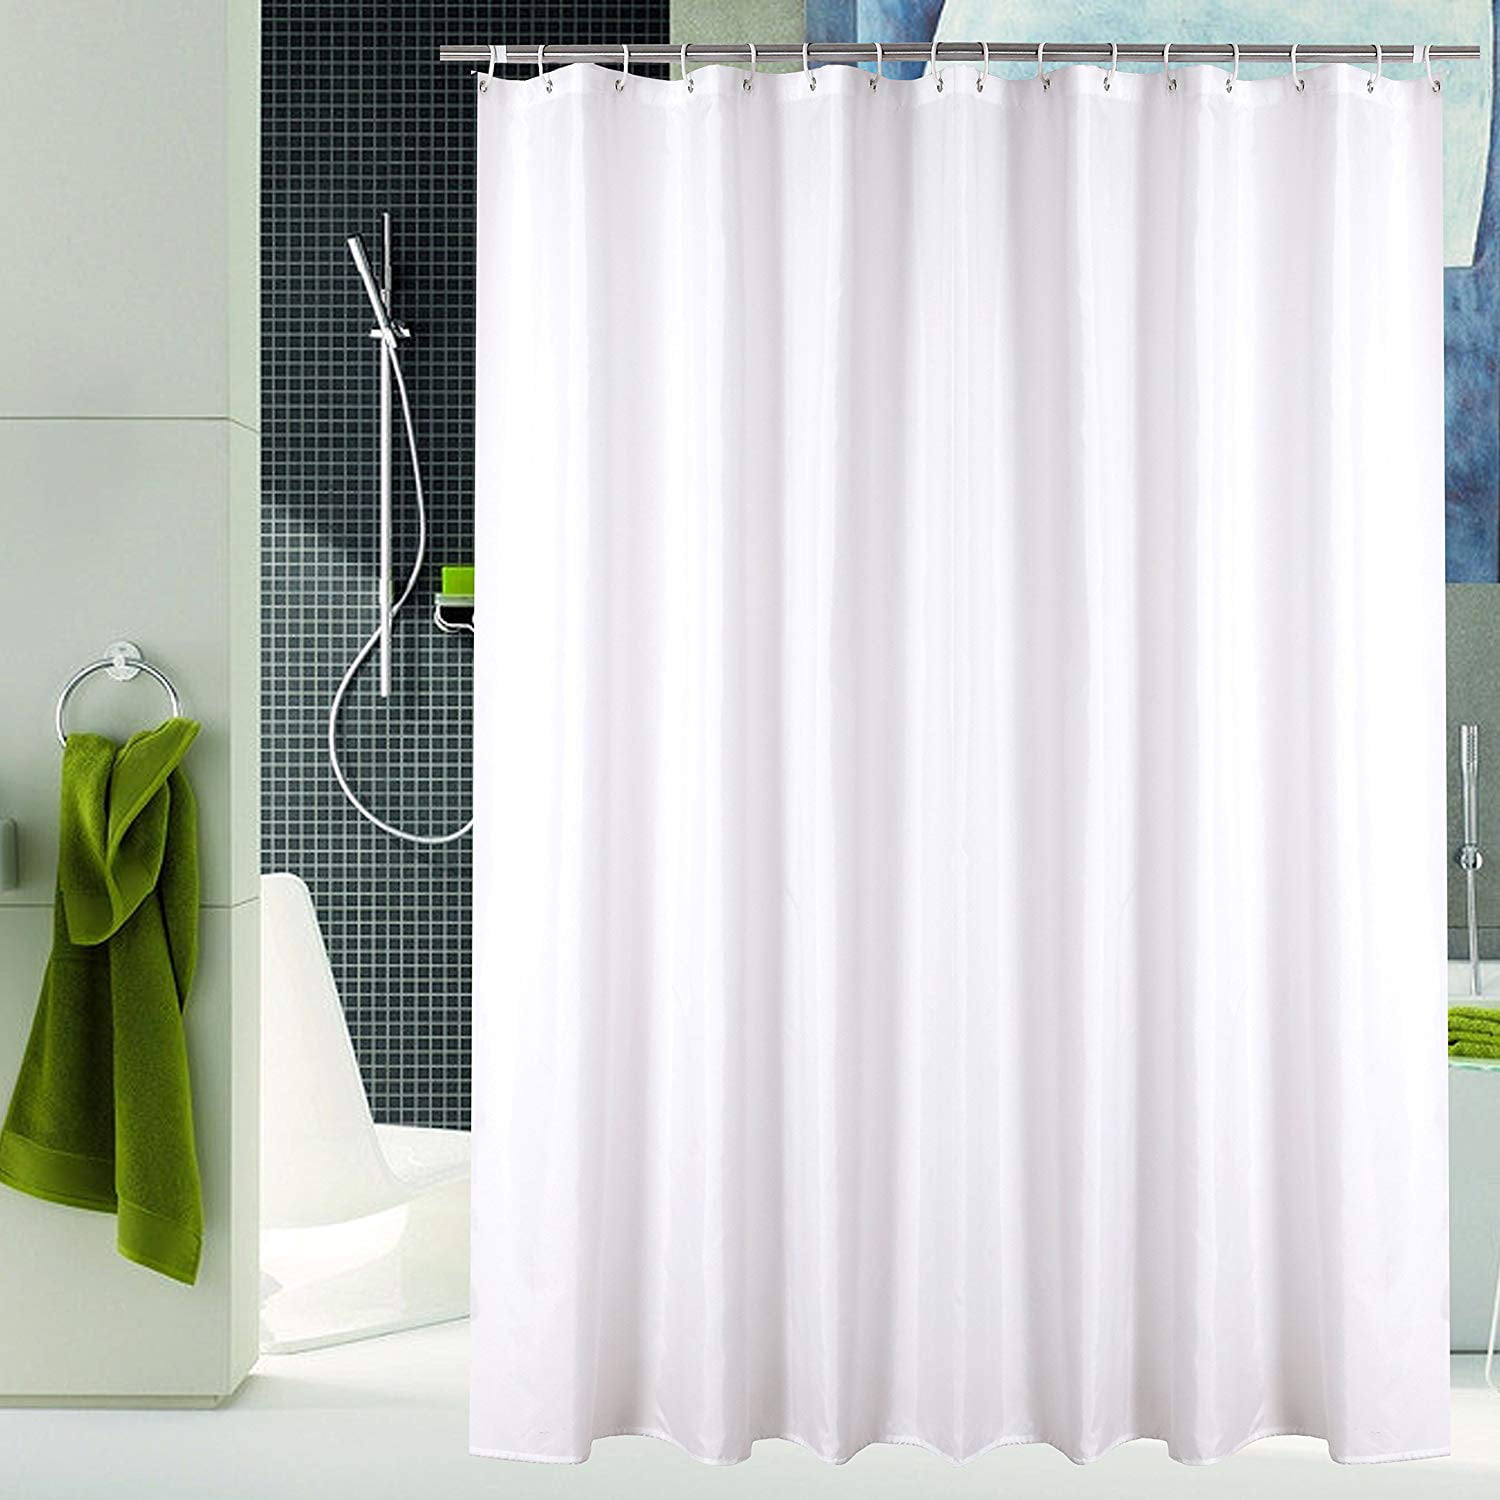 Extra Wide Long Shower Curtain for Bathroom Water Repellent Fabric Mildew Resistant Washable Cloth 108 x 78, Brown Leaf Hotel Quality, Eco Friendly, Heavy Weight Hem with White Plastic Hooks